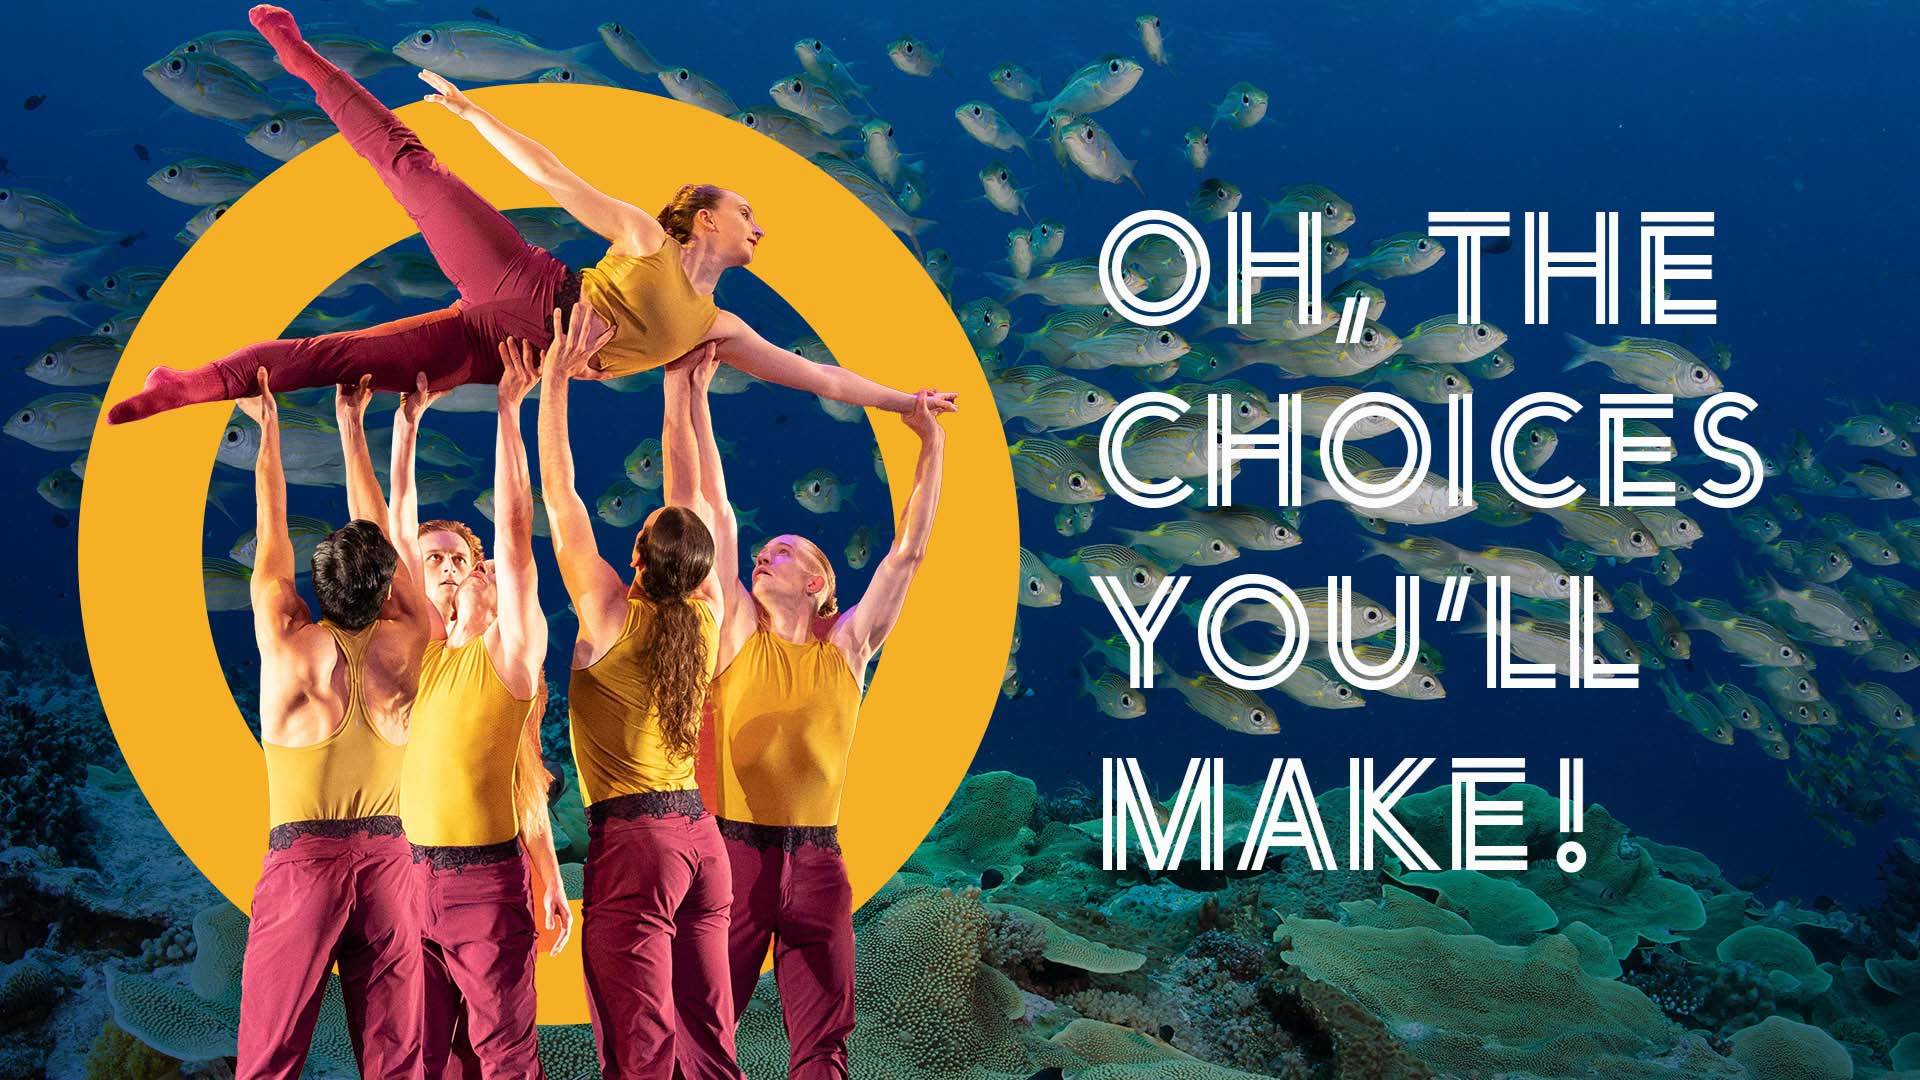 Banner reads: "Oh, the choices you'll make!" A troupe of dancers in yellow and red outfits hold up one dancer with one leg extended. The photo is digitally placed in a large yellow "O" with an image of a school of fish underwater behind.